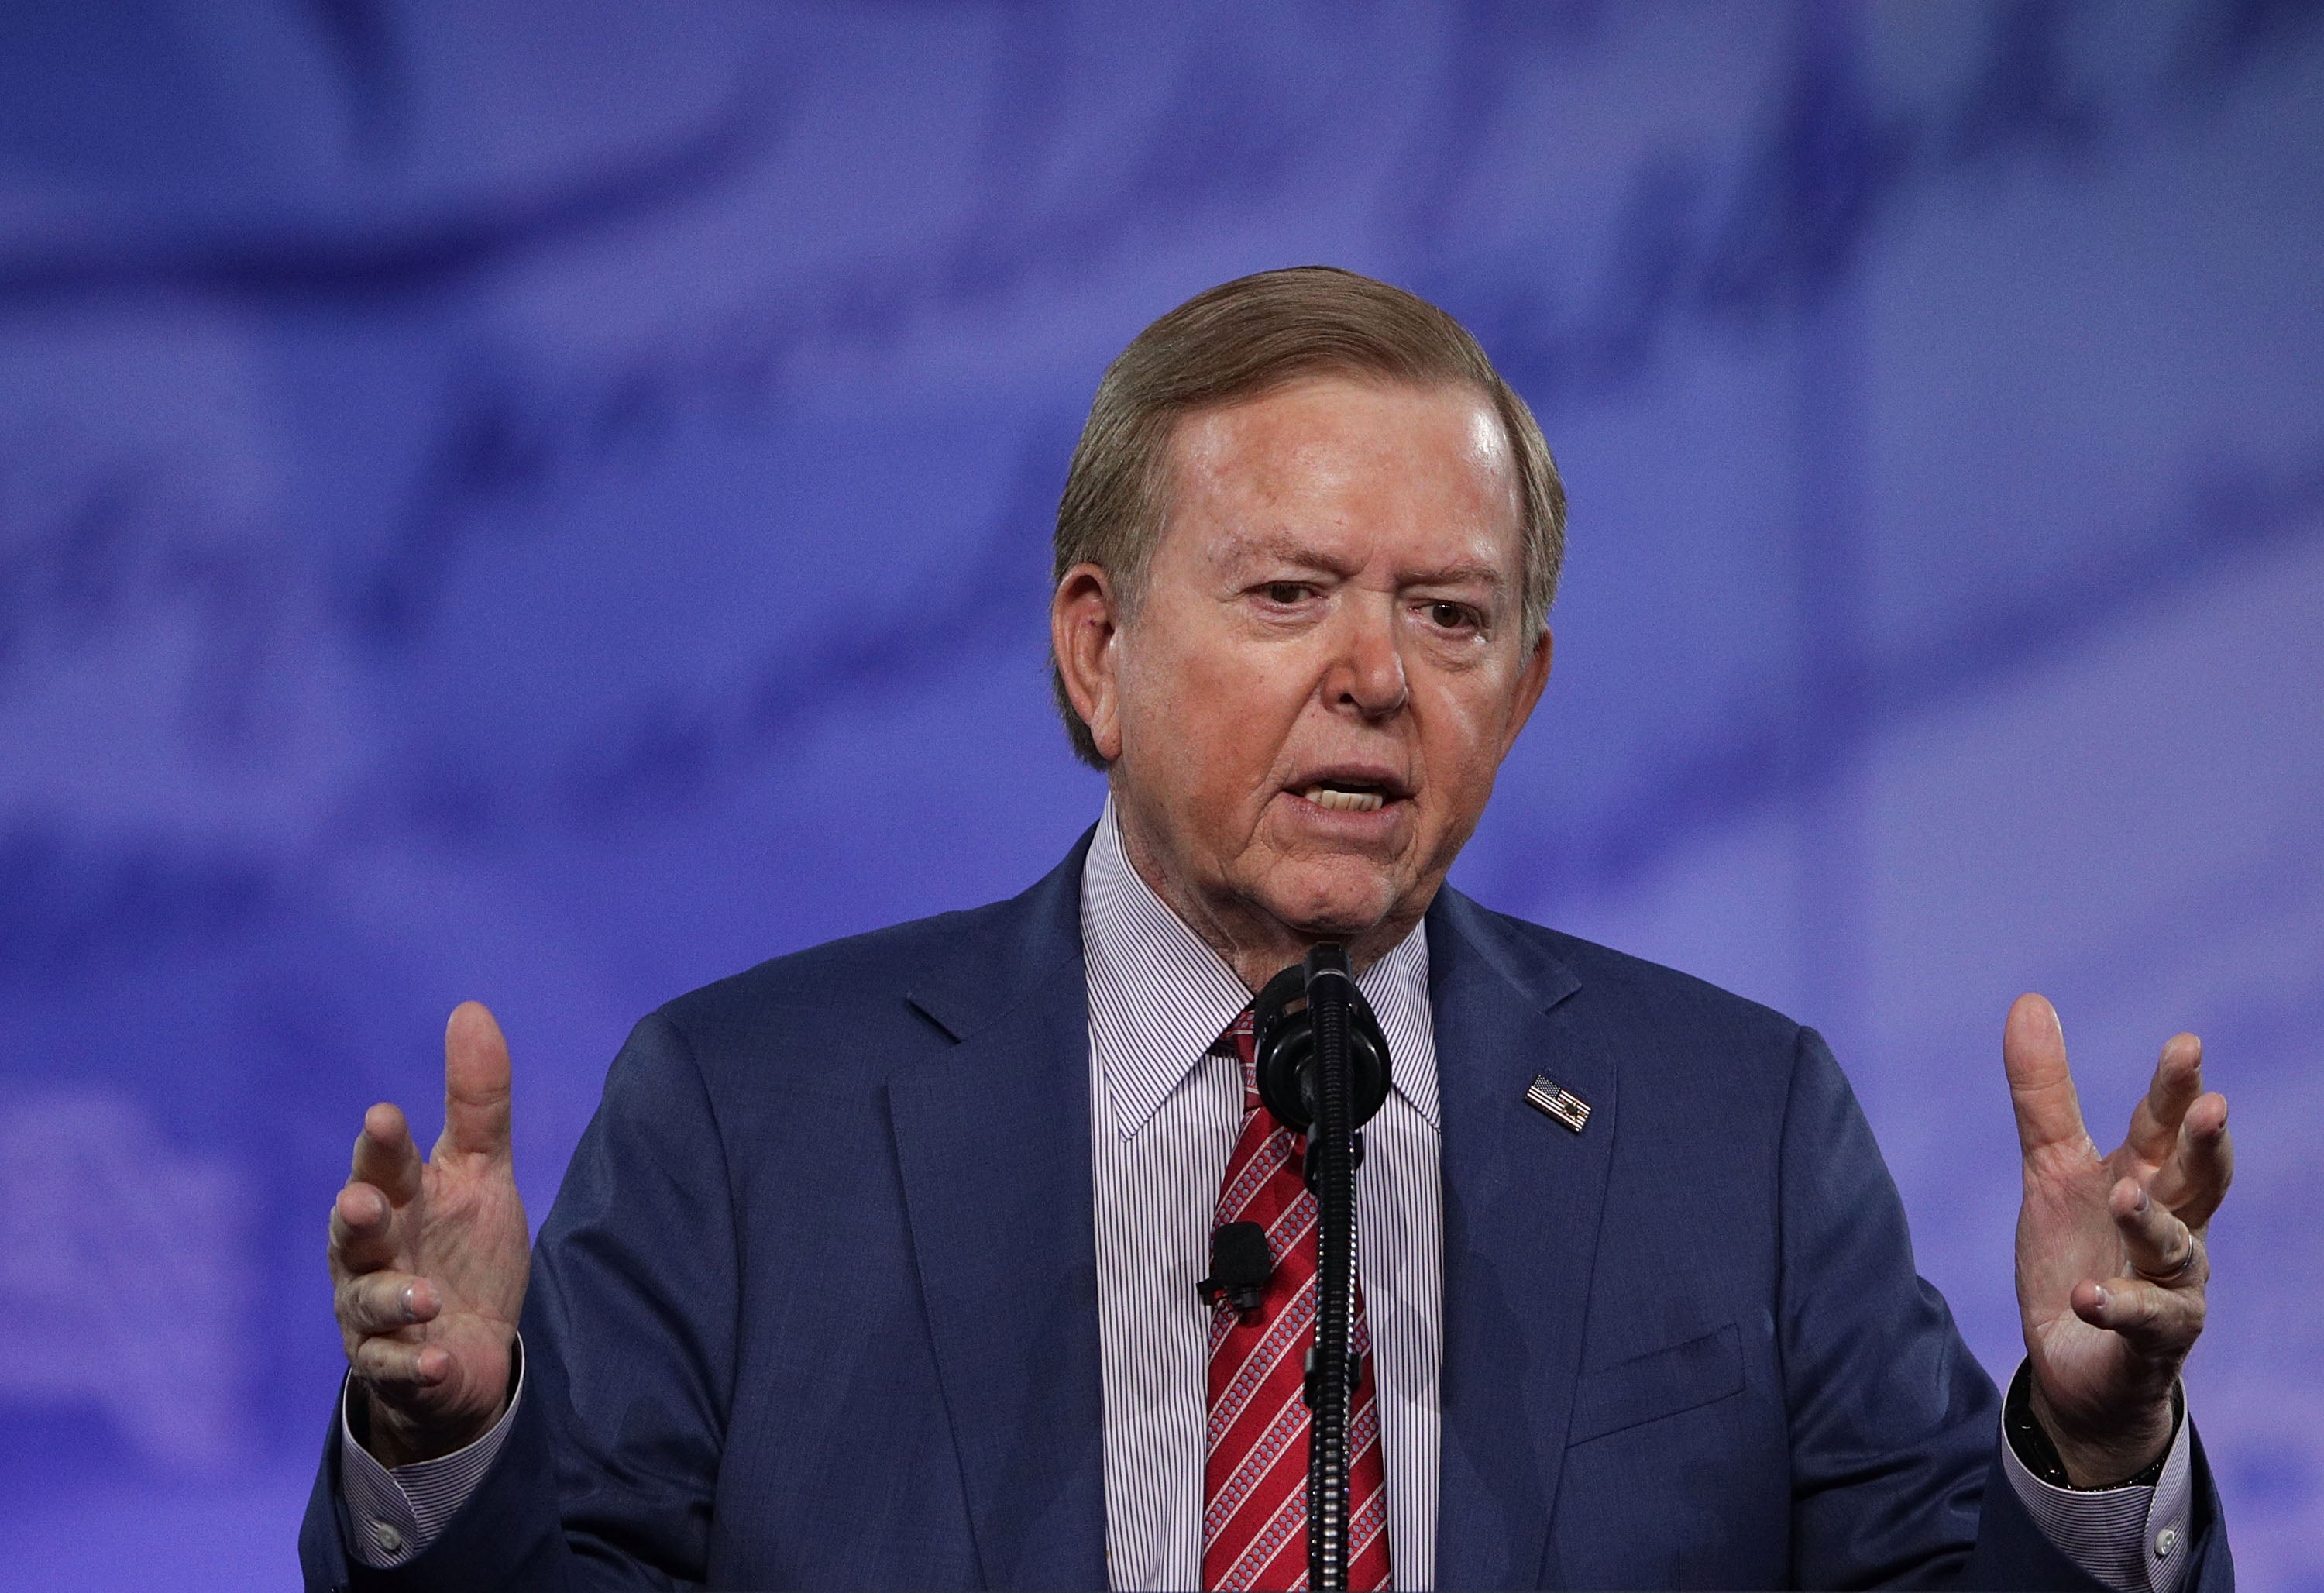 File Image: &nbsp; Lou Dobbs of Fox Business Network speaks during the Conservative Political Action Conference at the Gaylord National Resort and Convention Center 24 February 2017 in National Harbor, Maryland